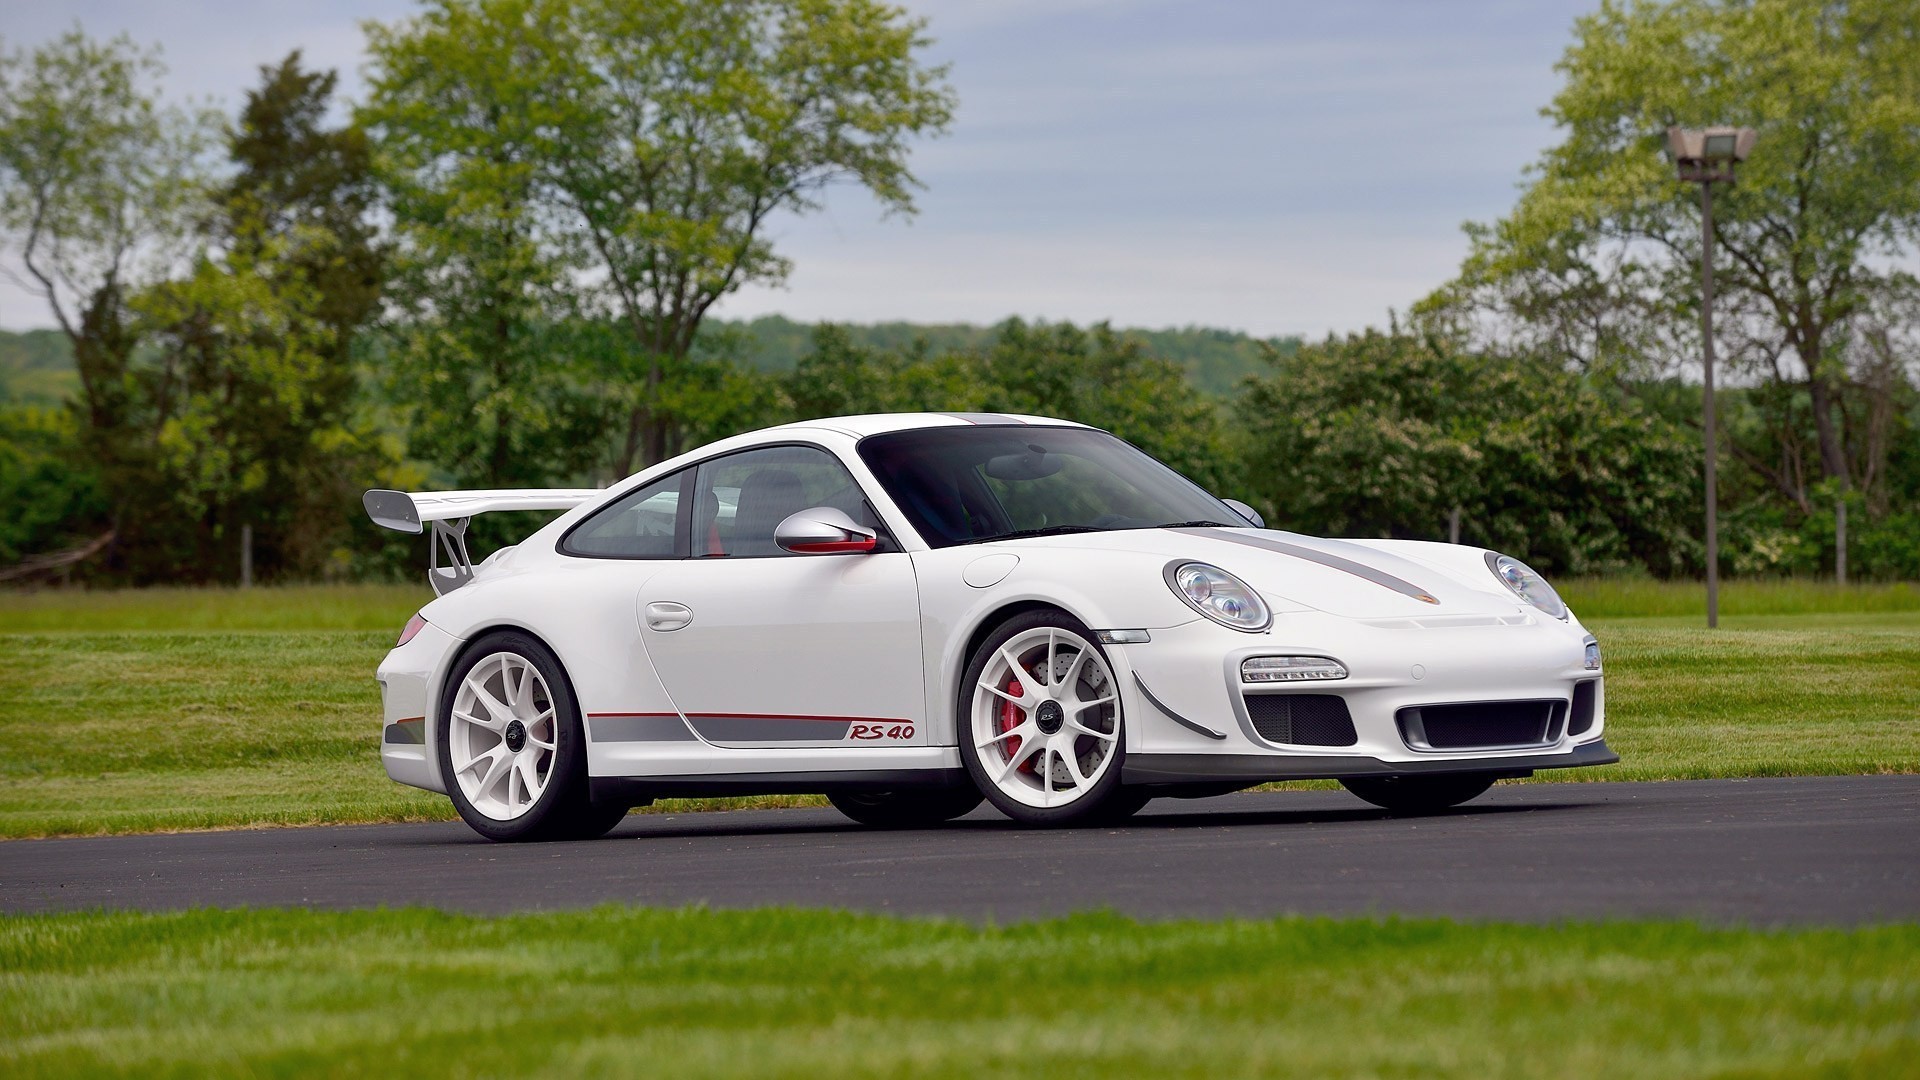 1920x1080 2011 Porsche 911 Gt3 Rs 4 0 Wallpapers Hd Images Wsupercars 2012 R